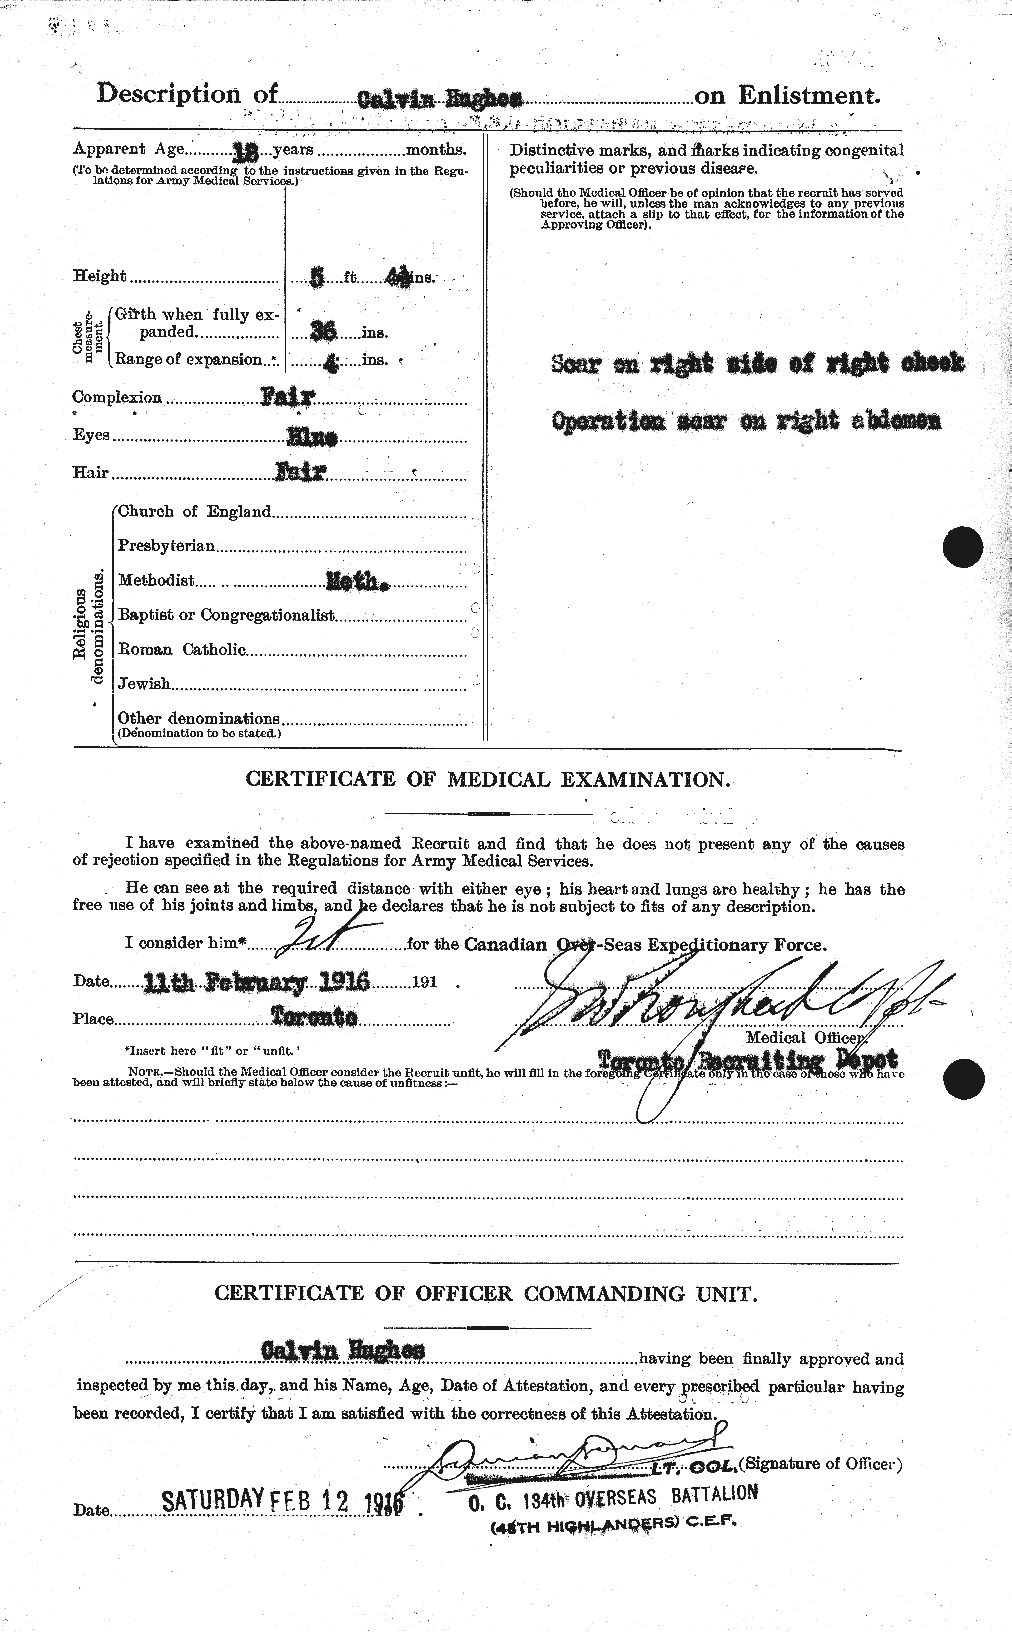 Personnel Records of the First World War - CEF 402591b